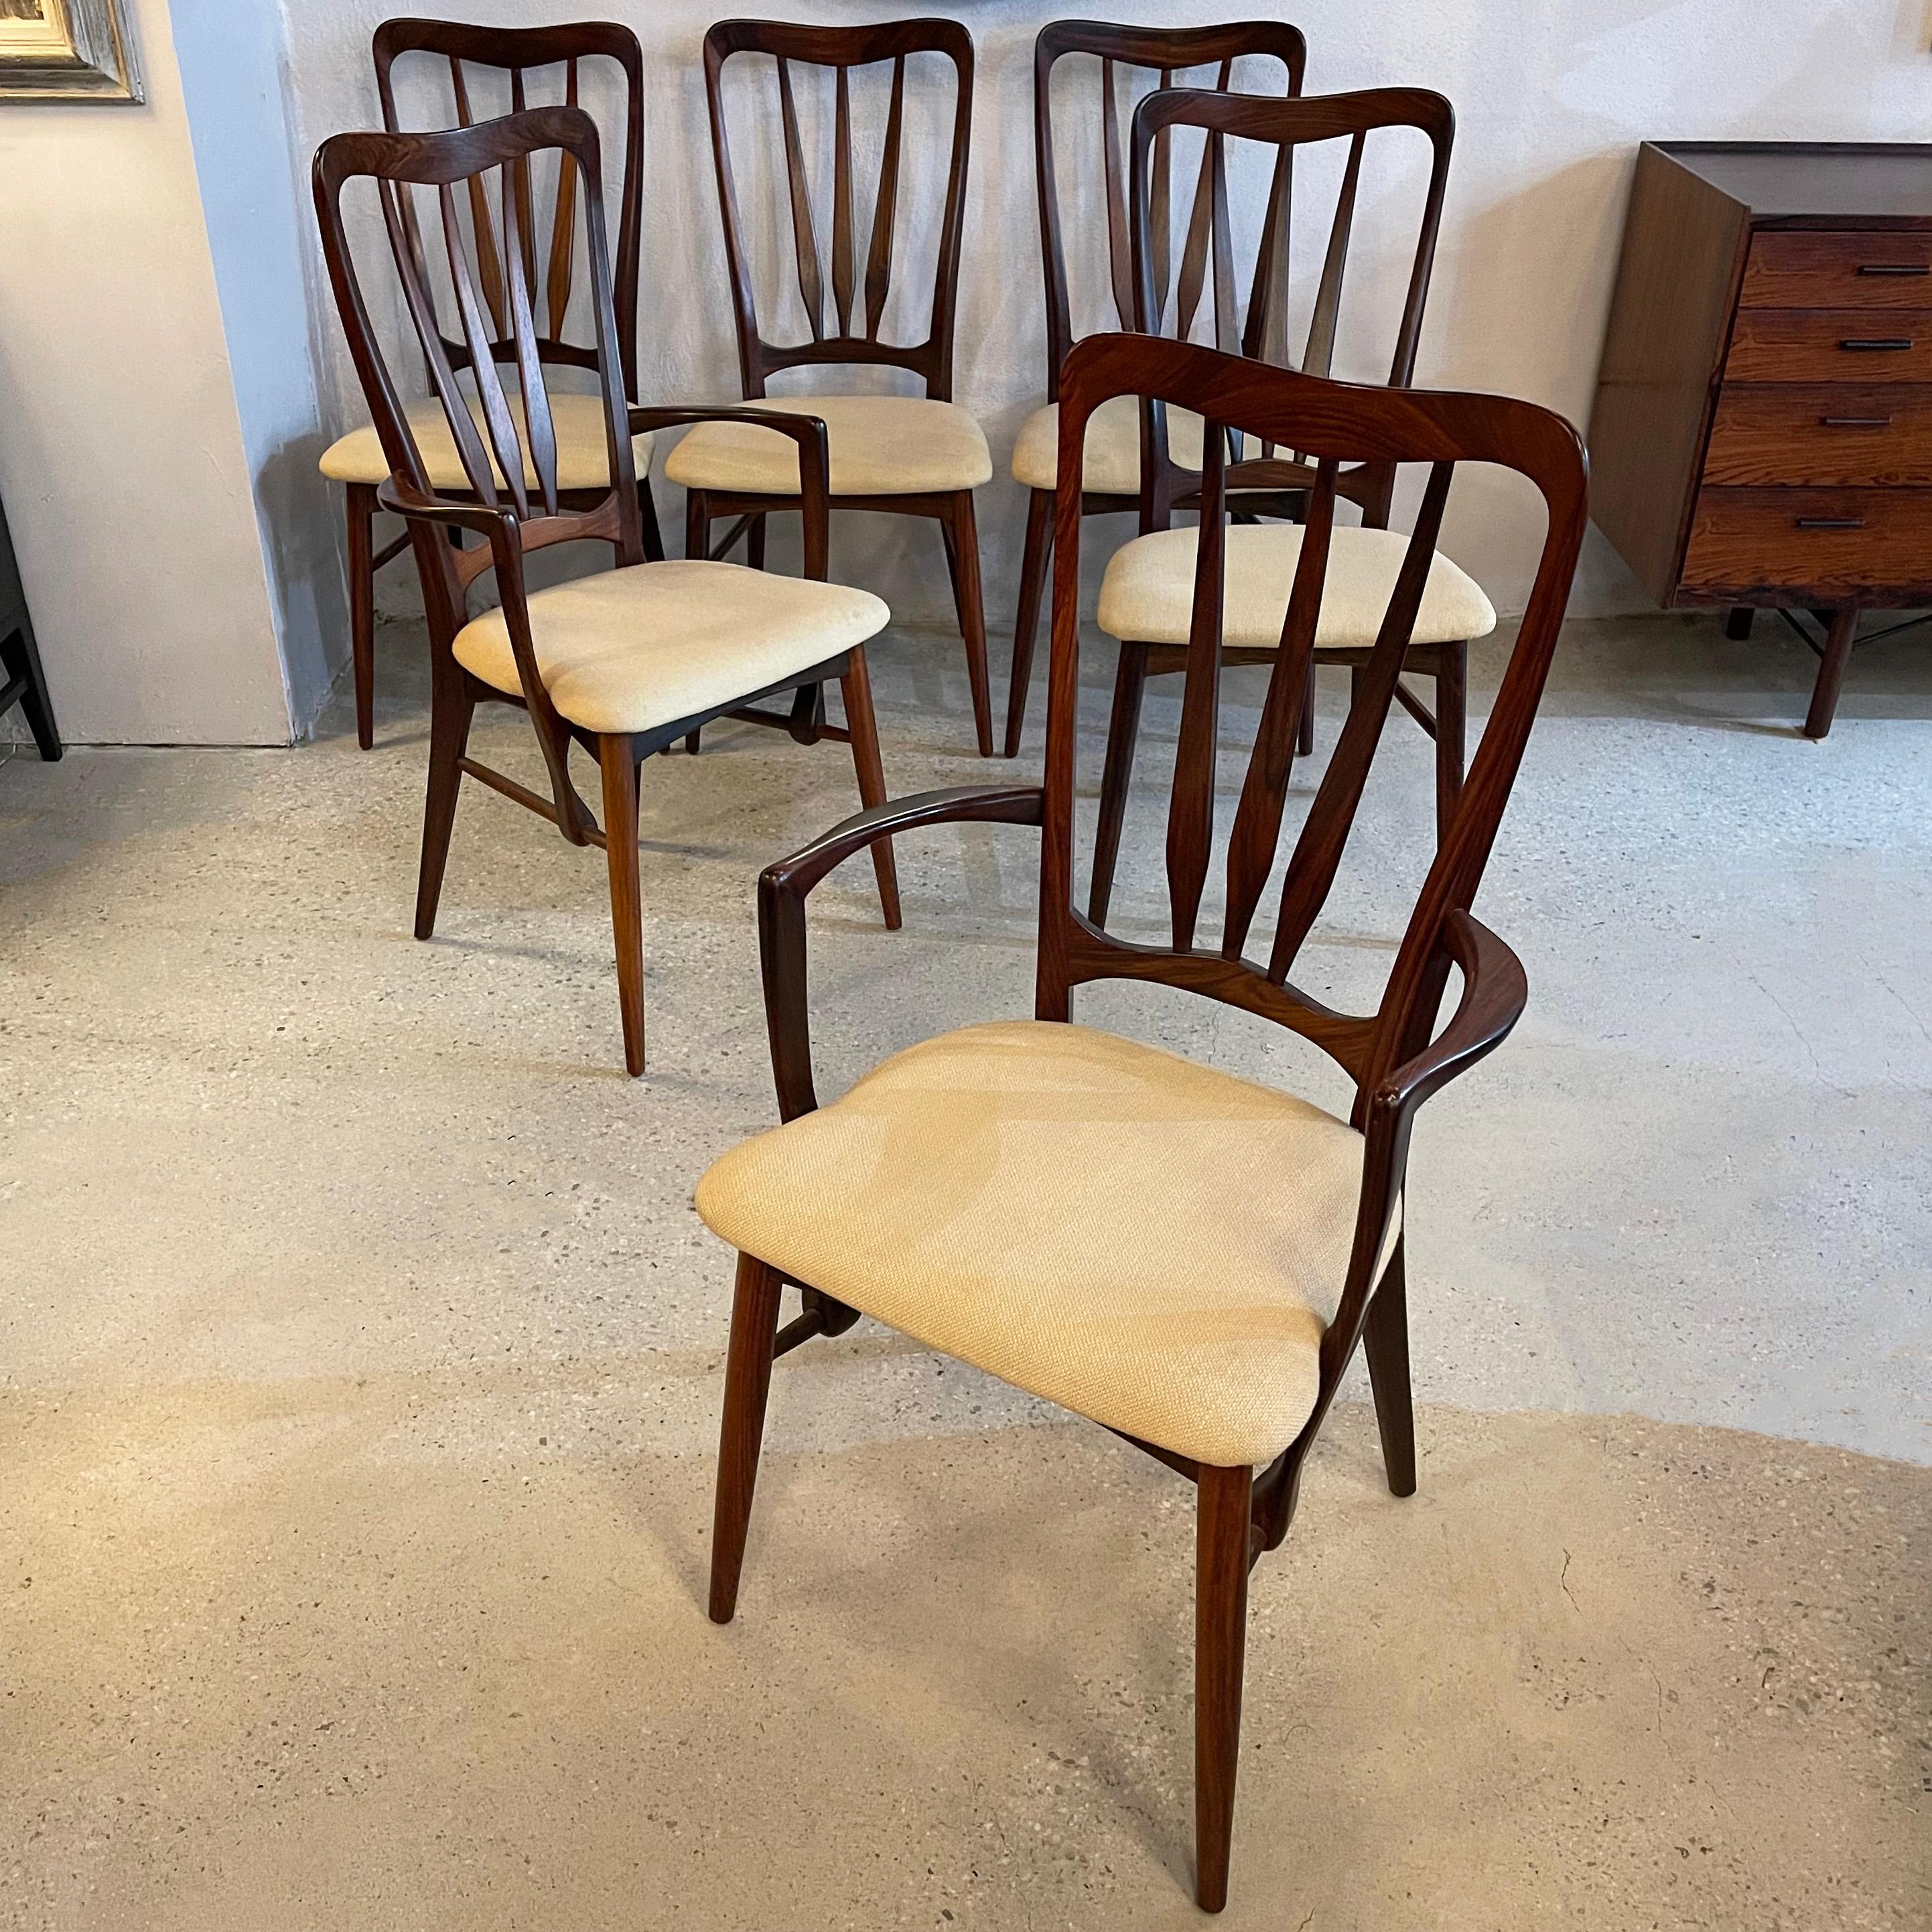 Set of six, Danish modern, rosewood, “Ingrid” dining chairs by Niels Koefoed for Koefoeds Hornslet consists of four side chairs and two captain armchairs. The curvaceous frames feature high backs with a deep rosewood grain throughout and subtle